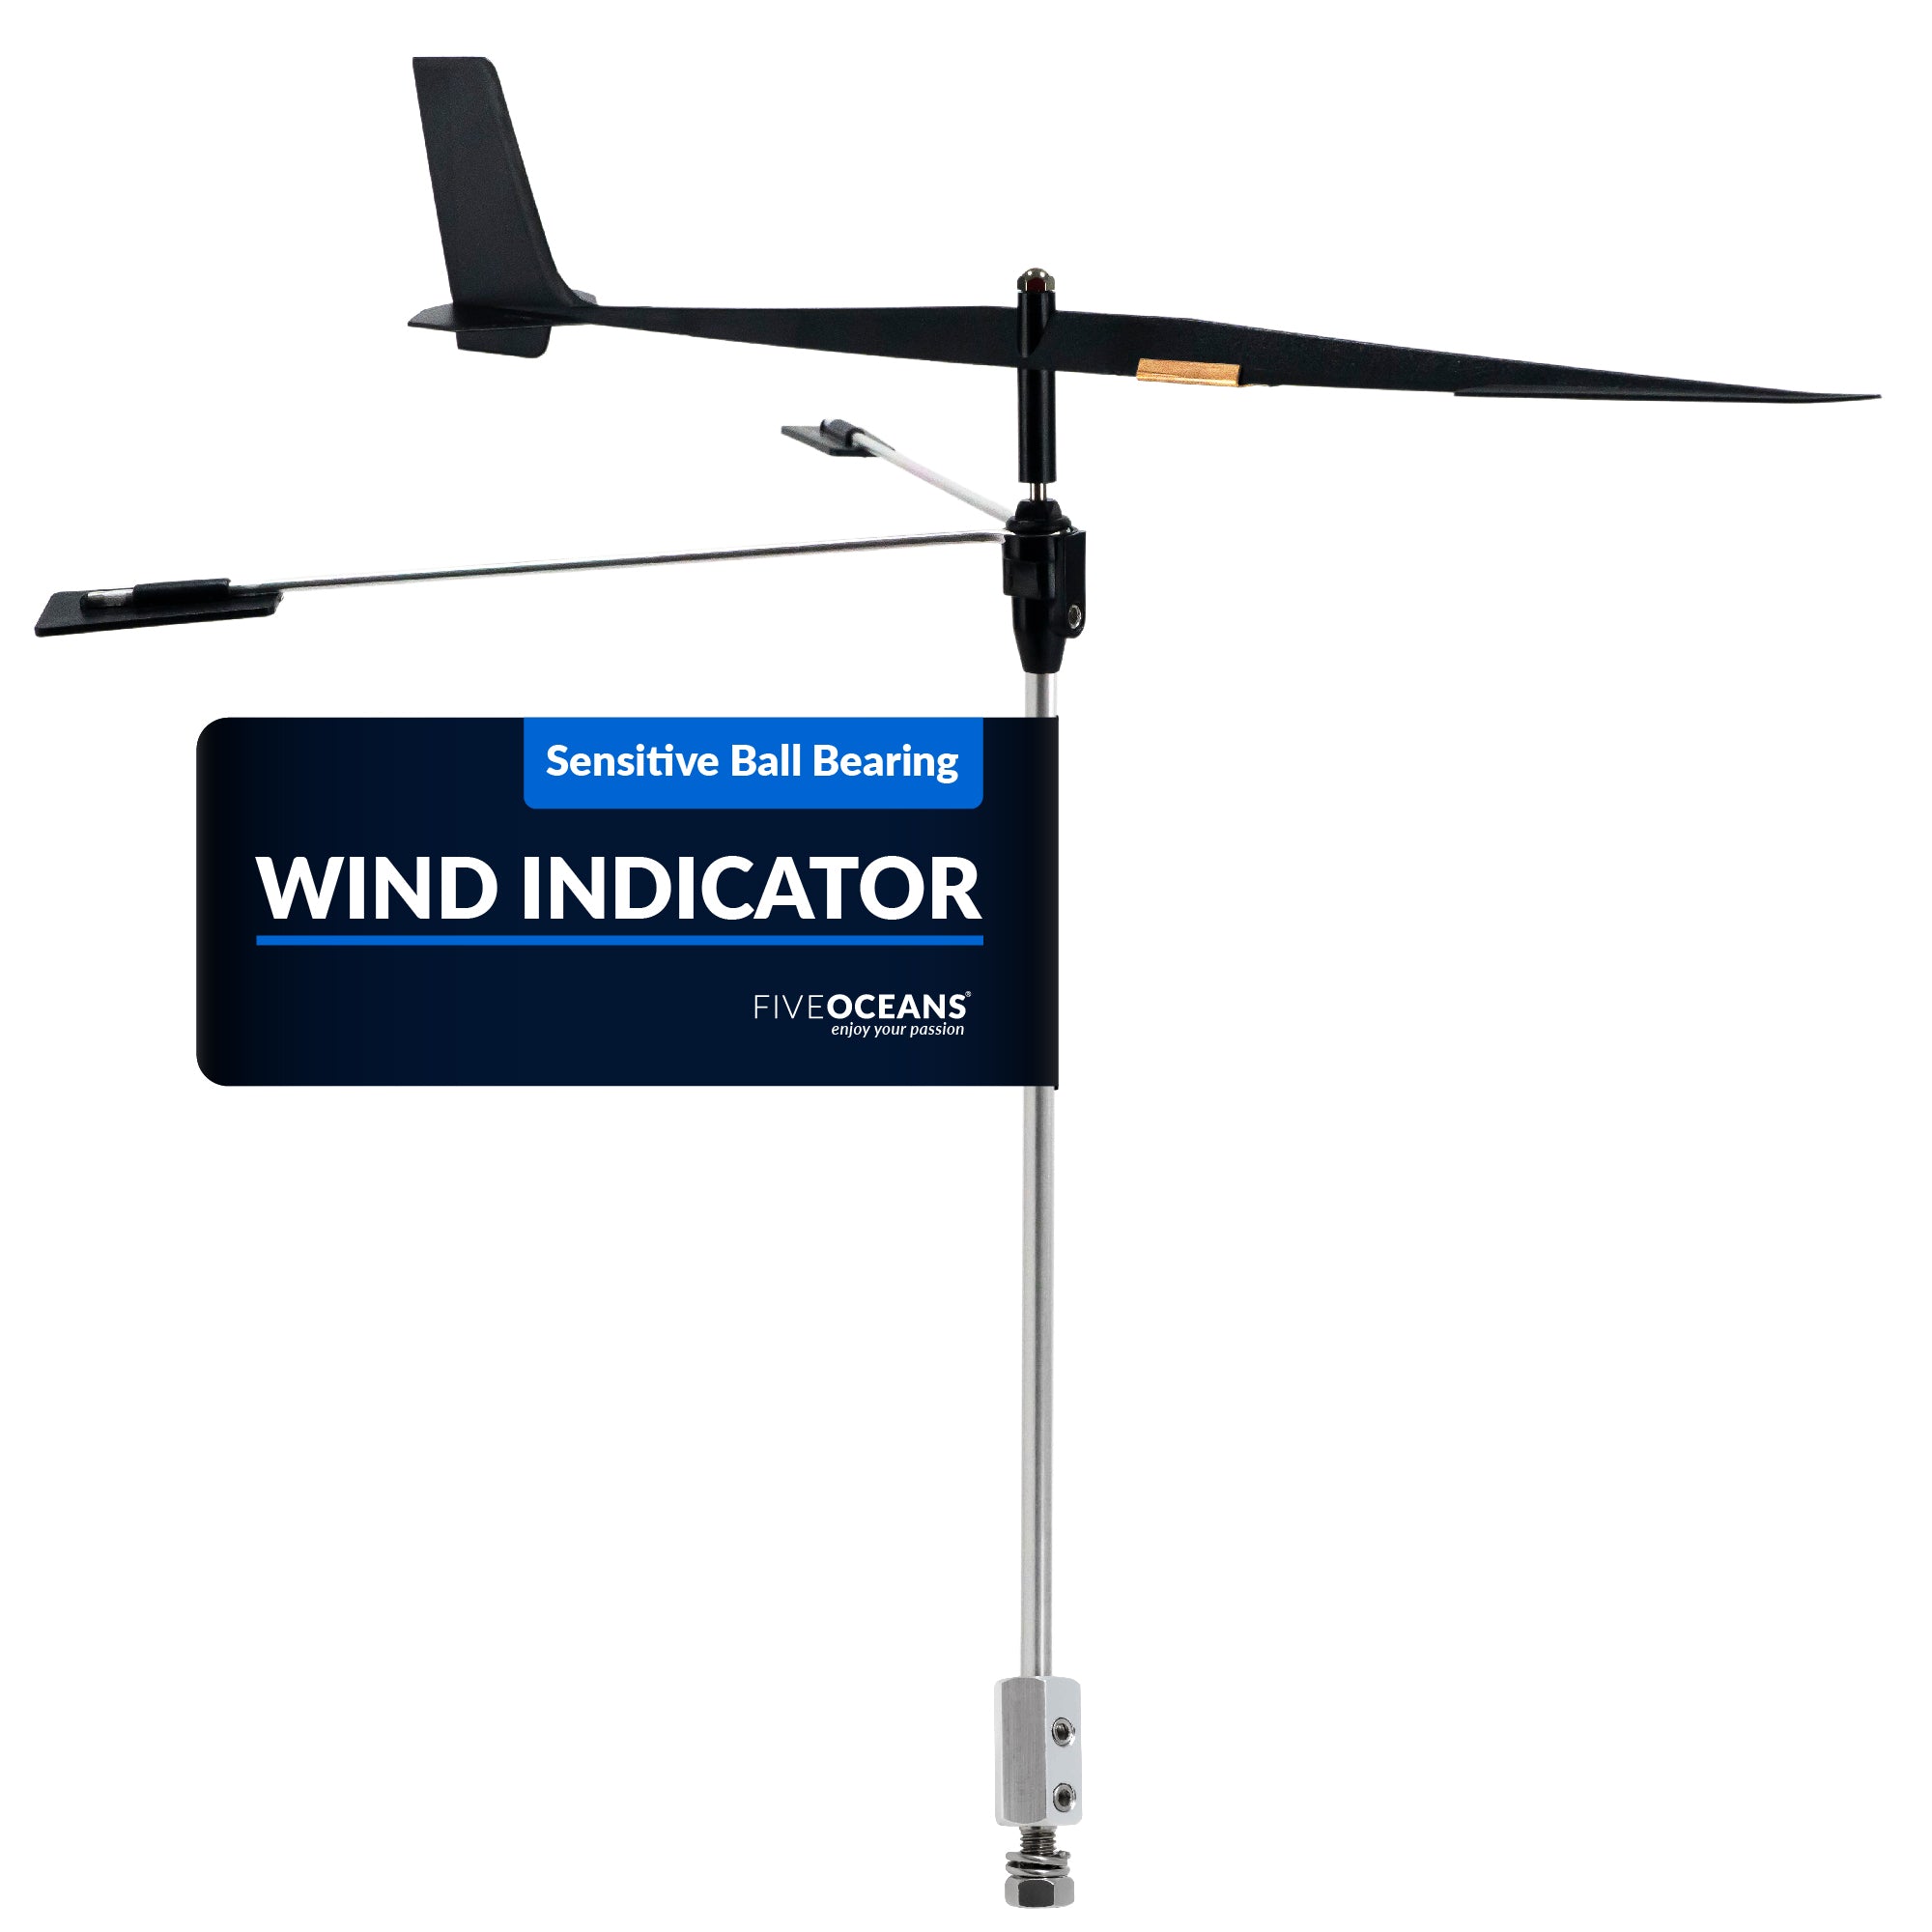 Wind Indicator with Sensitive Ball Bearing, 14-1/2" - FO2080